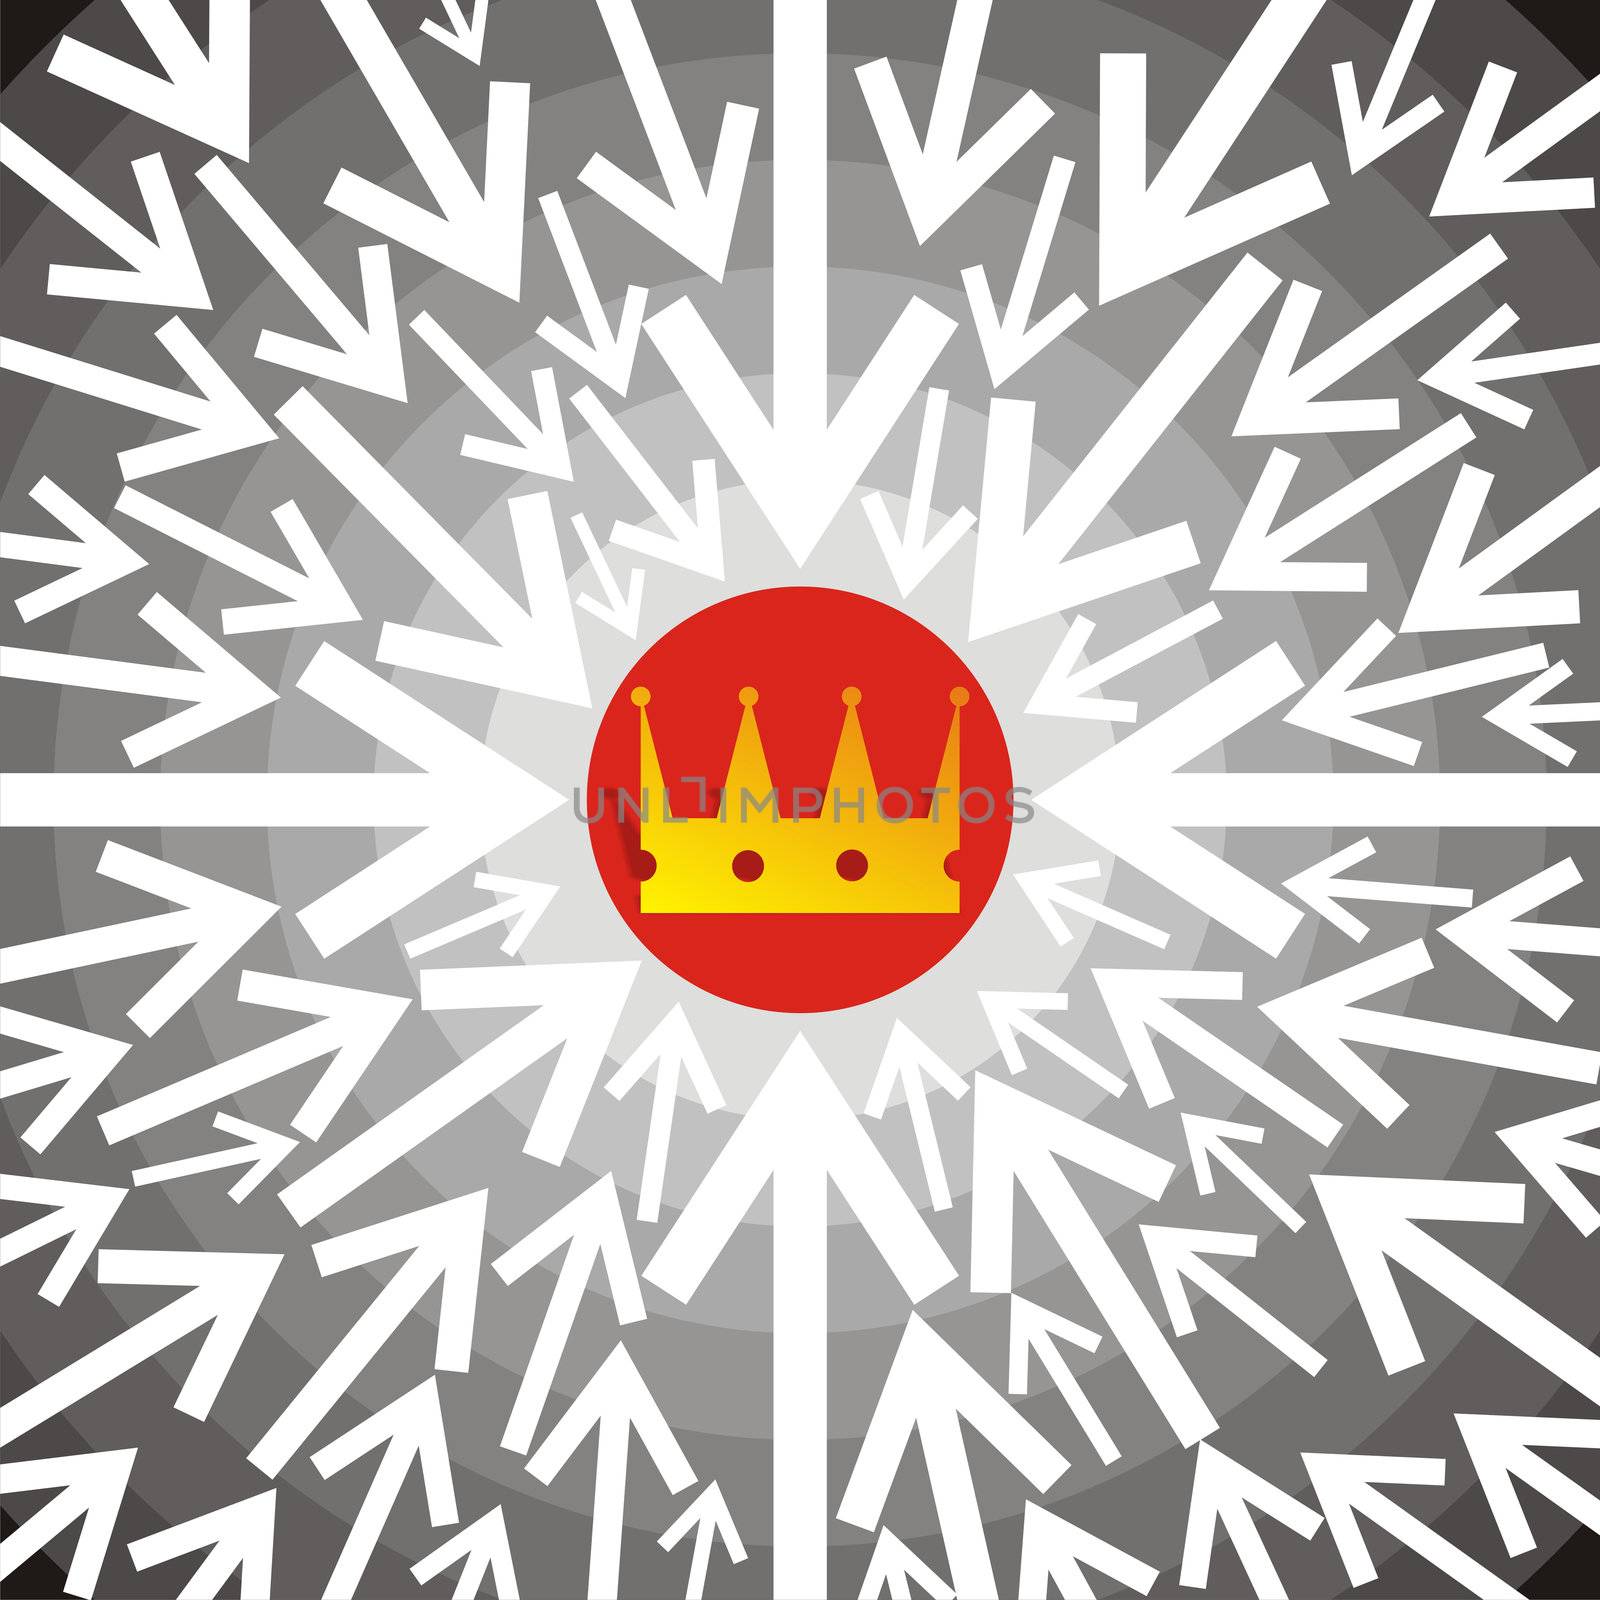 Group of white arrows pointing to golden crown